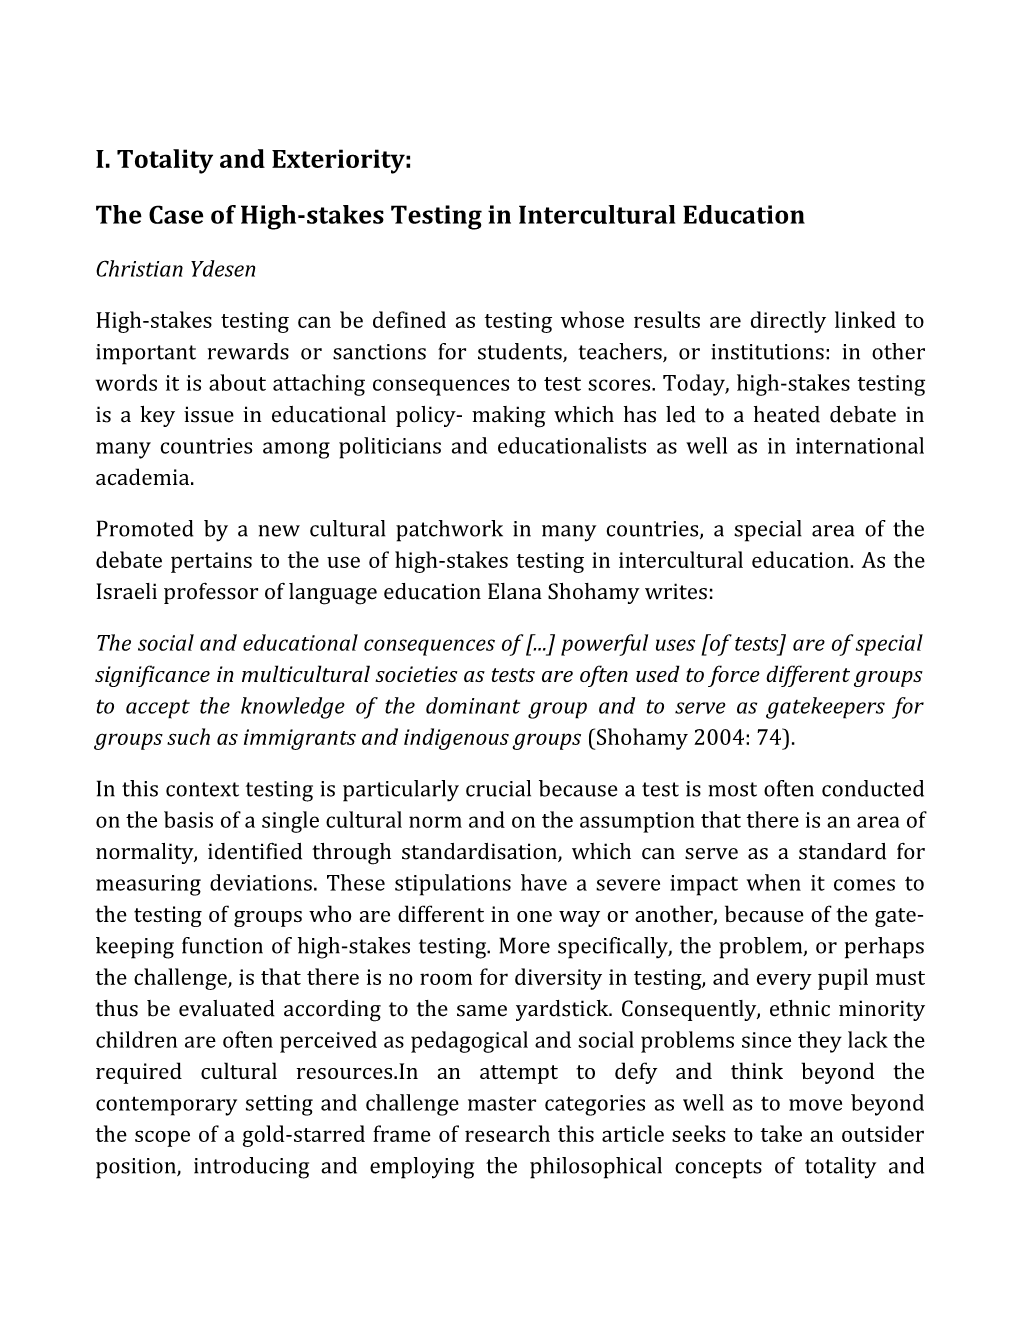 The Case of High-Stakes Testing in Intercultural Education